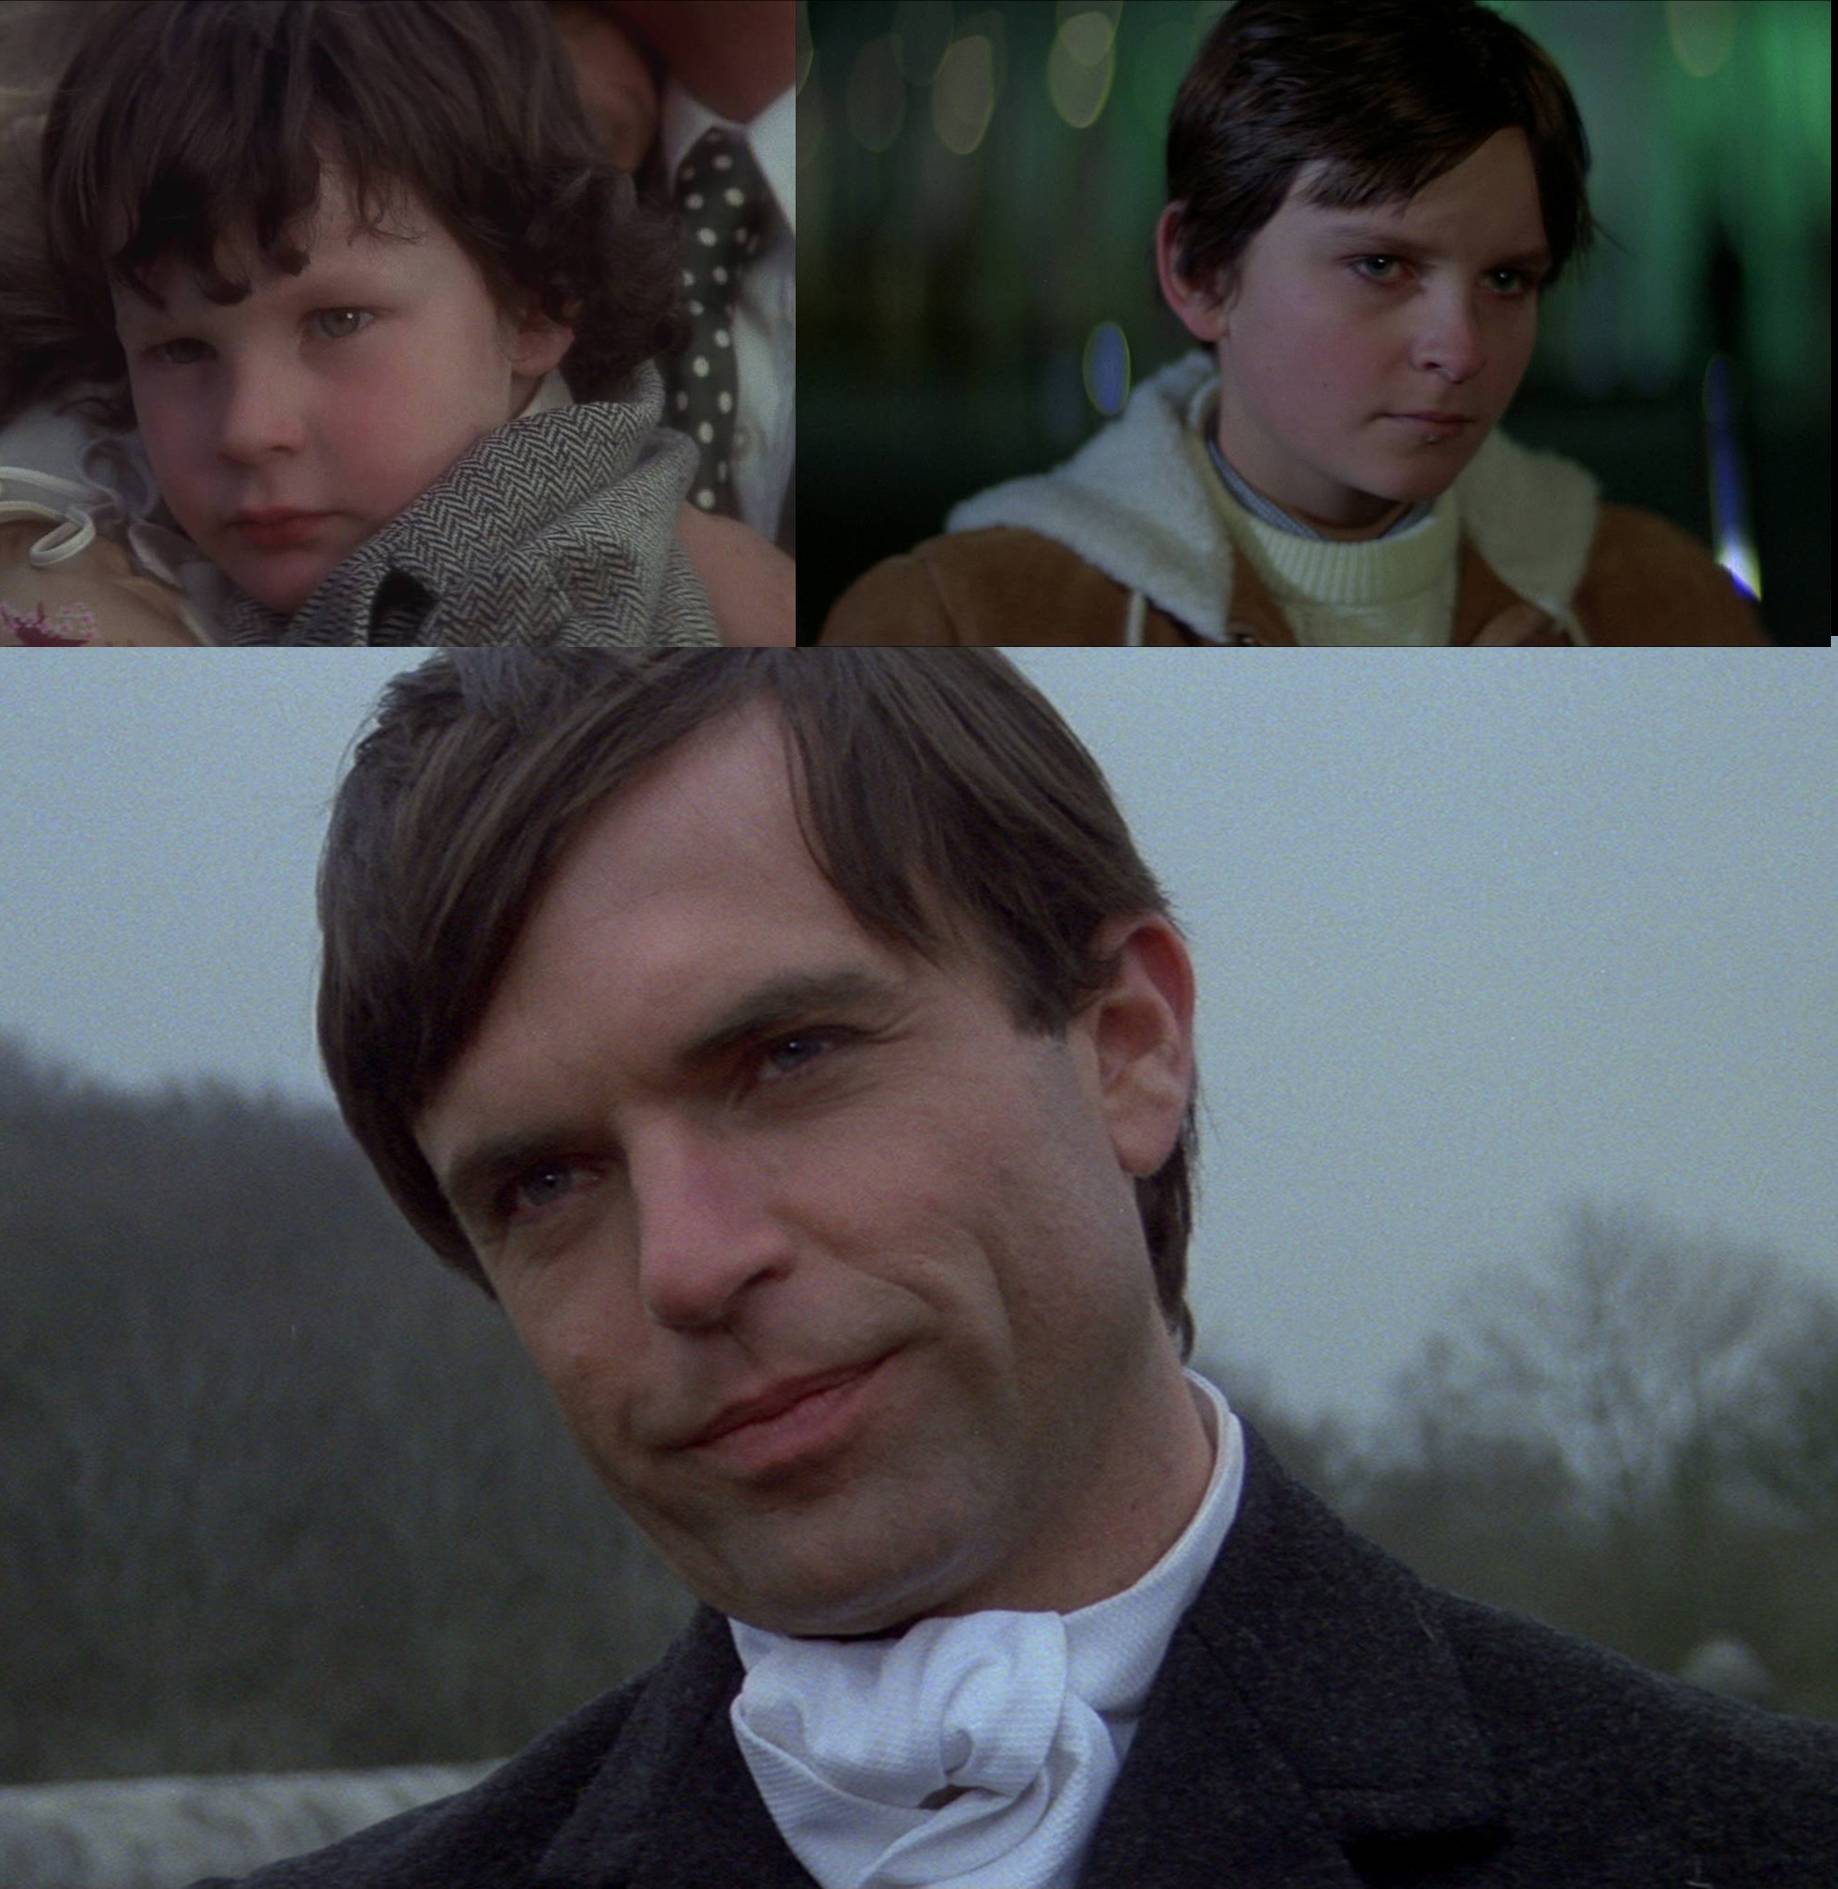 The Omen (1976) High Quality Background on Wallpapers Vista